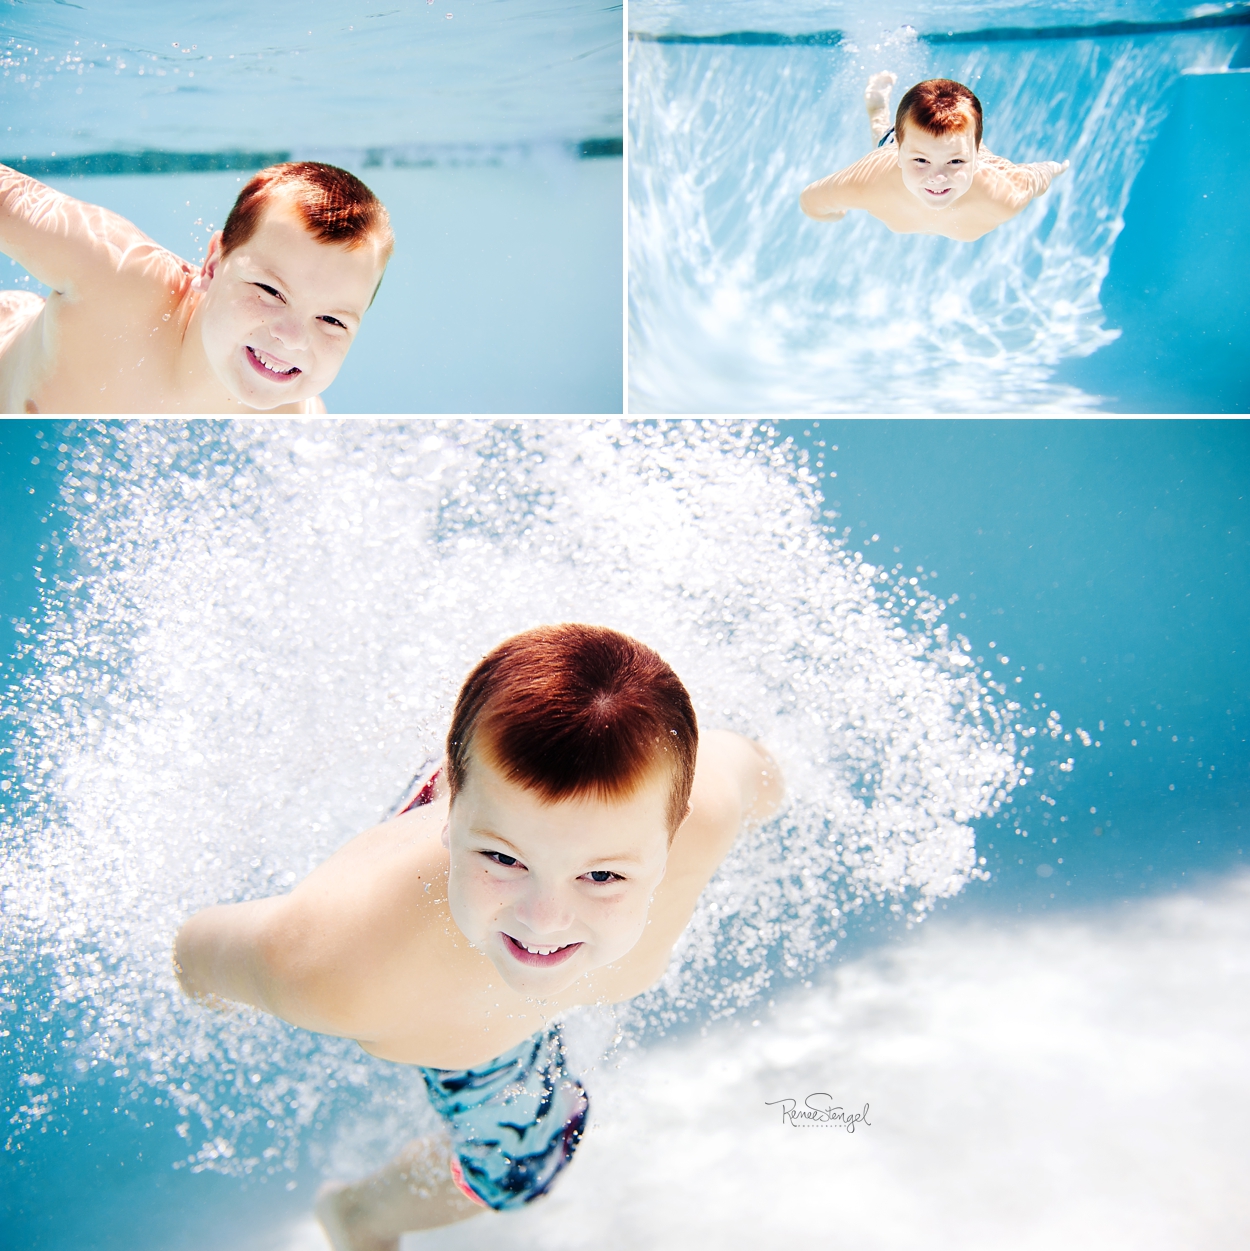 RENEE STENGEL Photography | Charlotte Portrait and Underwater Photographer | Underwater Swimmer Boy | Pool Cannonball Splash and Bubbles